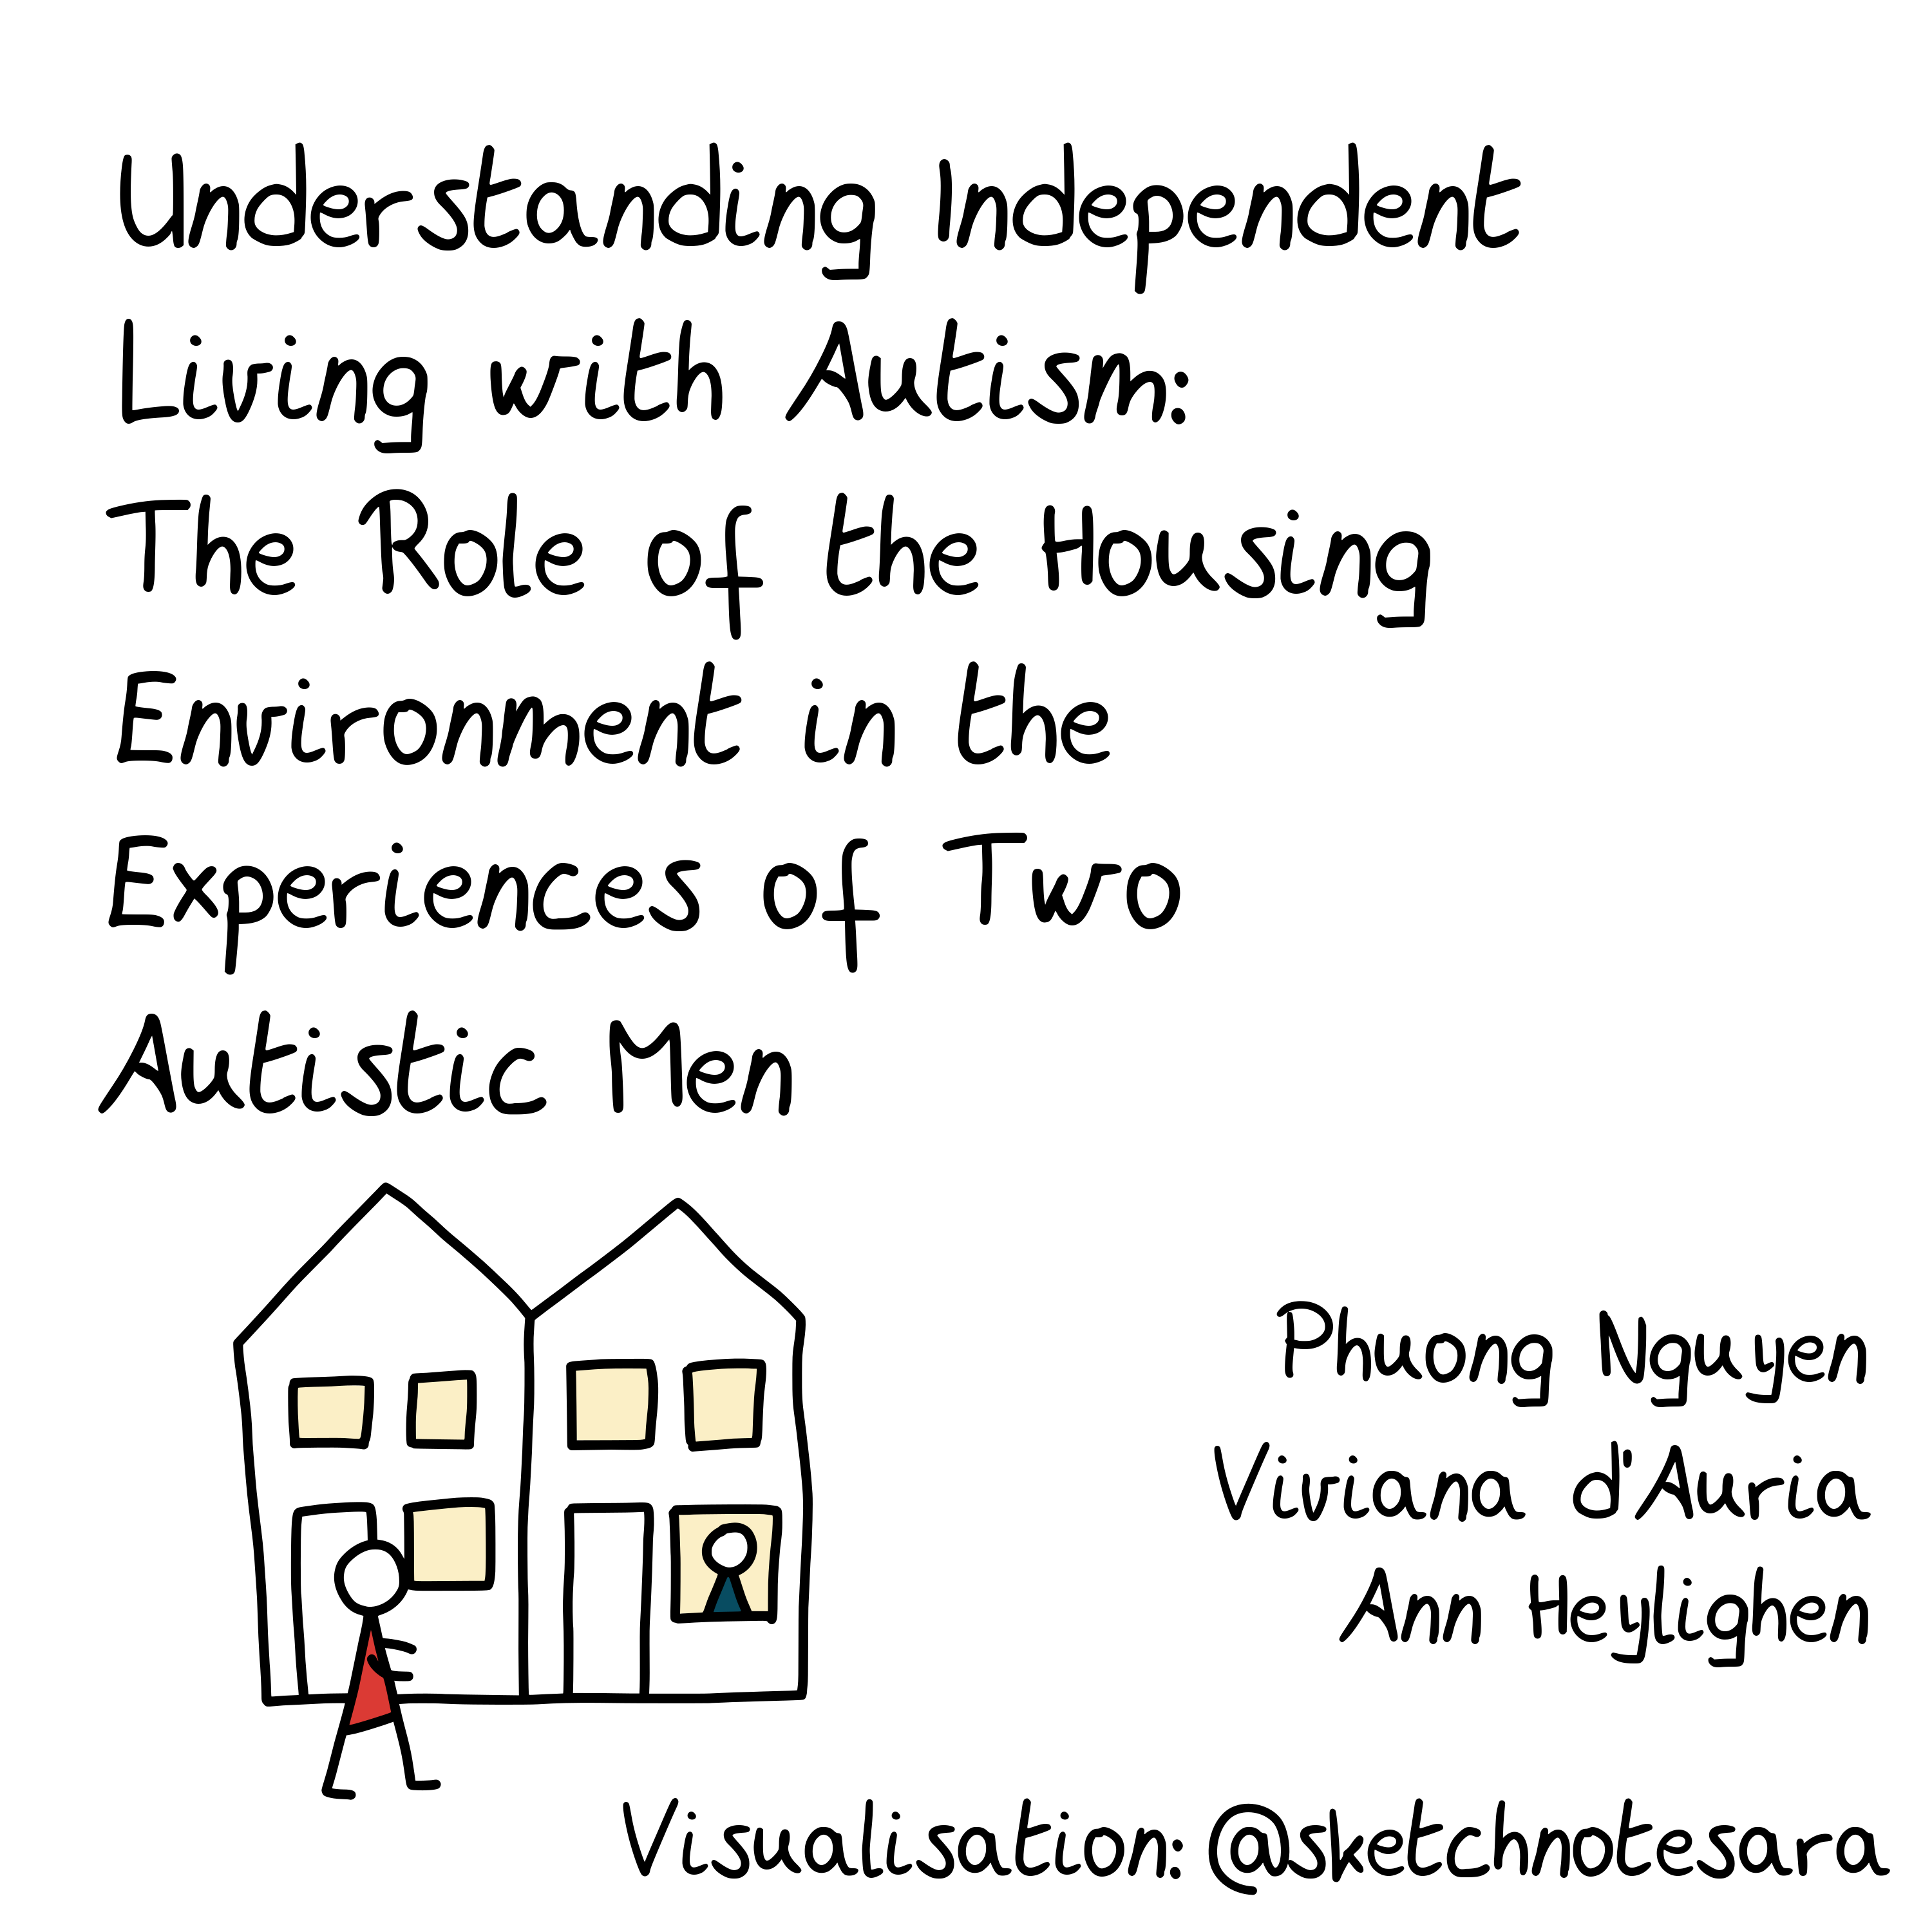 Sketchnote of Sketchnote of Research Article on independent Living with Autism